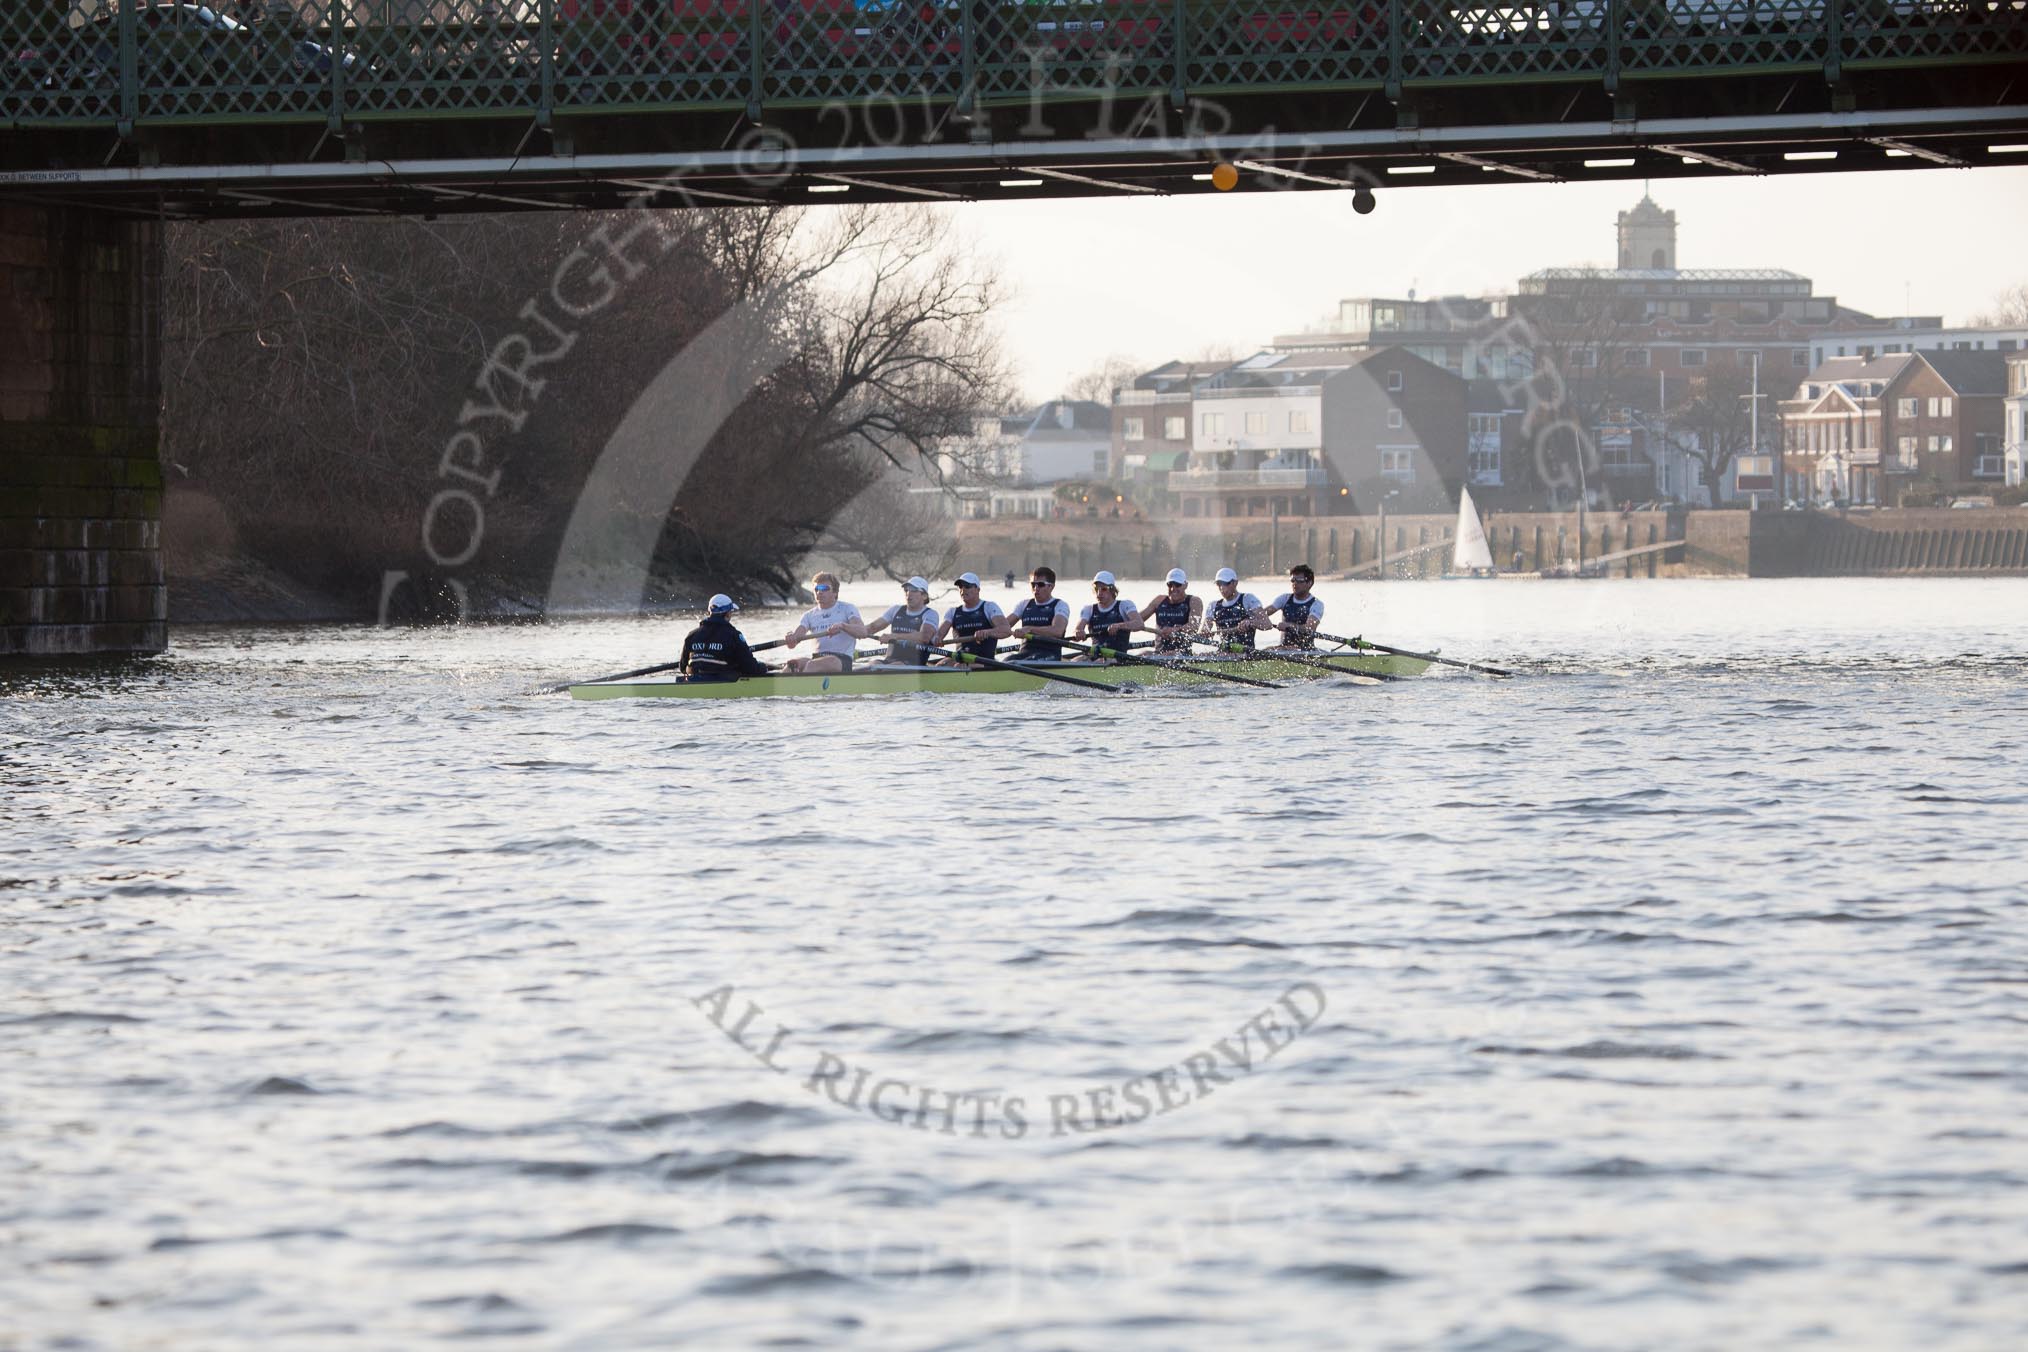 The Boat Race season 2014 - fixture OUBC vs German U23: The OUBC boat at Hammersmith Bridge..
River Thames between Putney Bridge and Chiswick Bridge,



on 08 March 2014 at 16:53, image #116